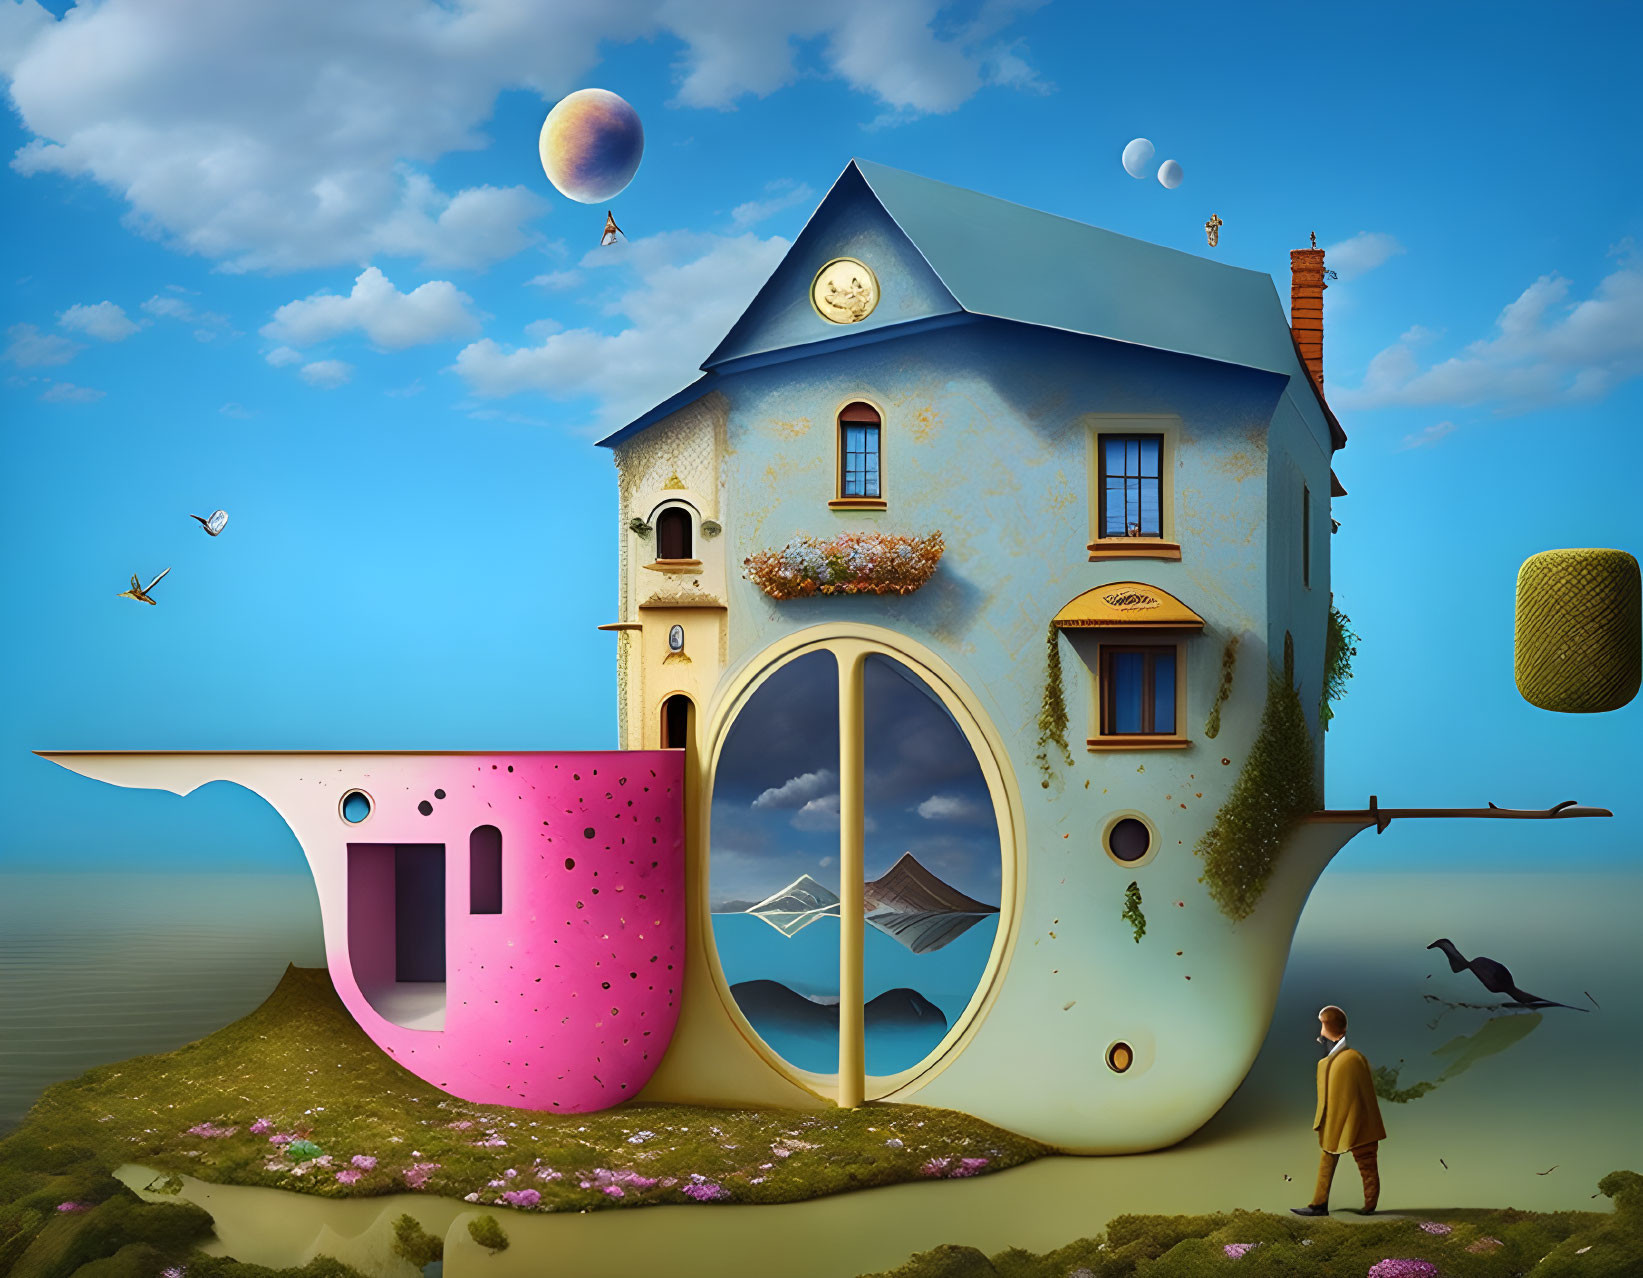 Whimsical surreal artwork with teapot house, celestial elements, man, and birds